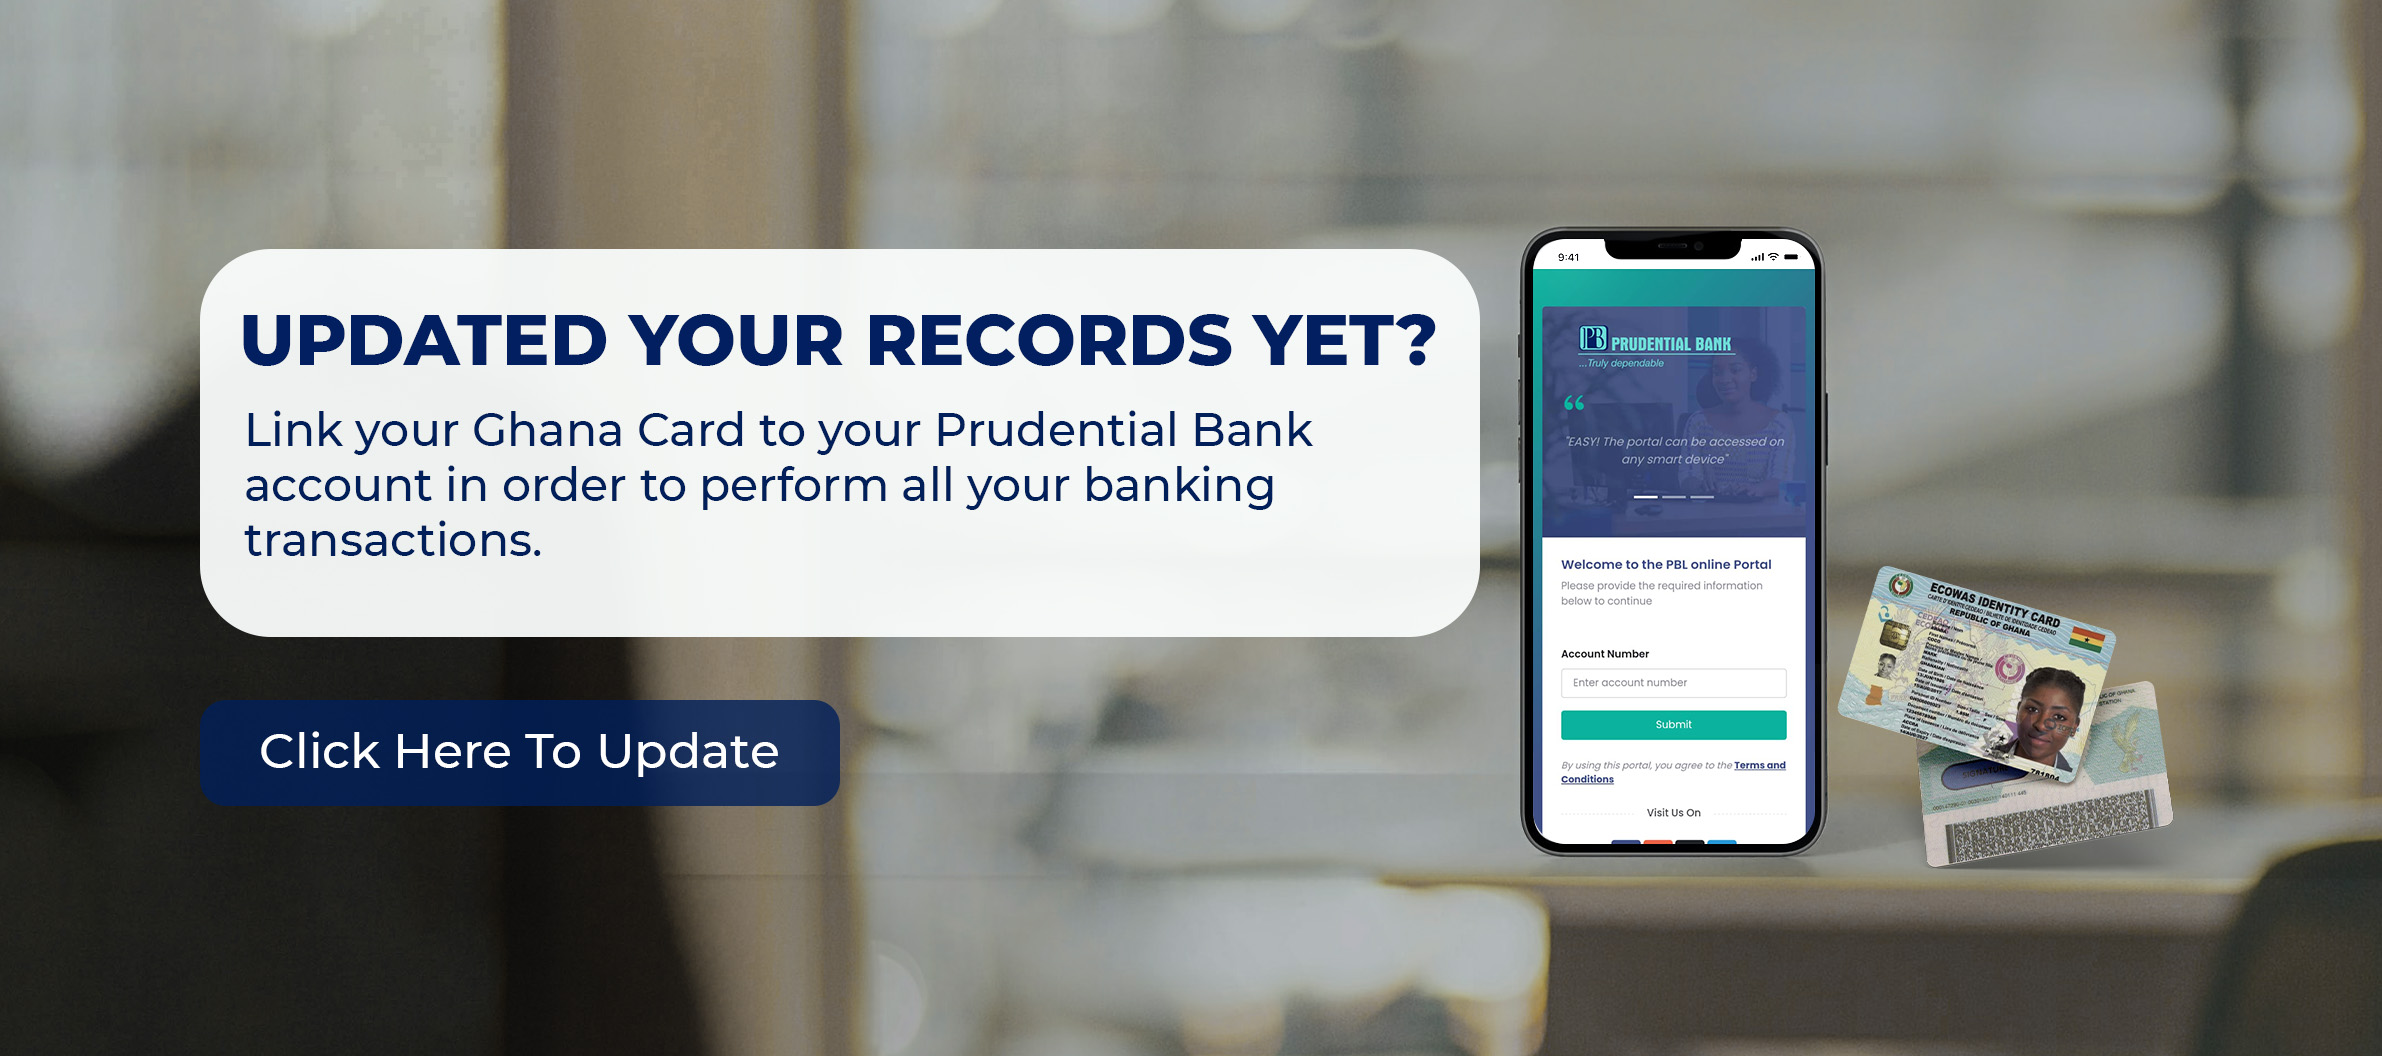 Update your Records with your Ghana Card